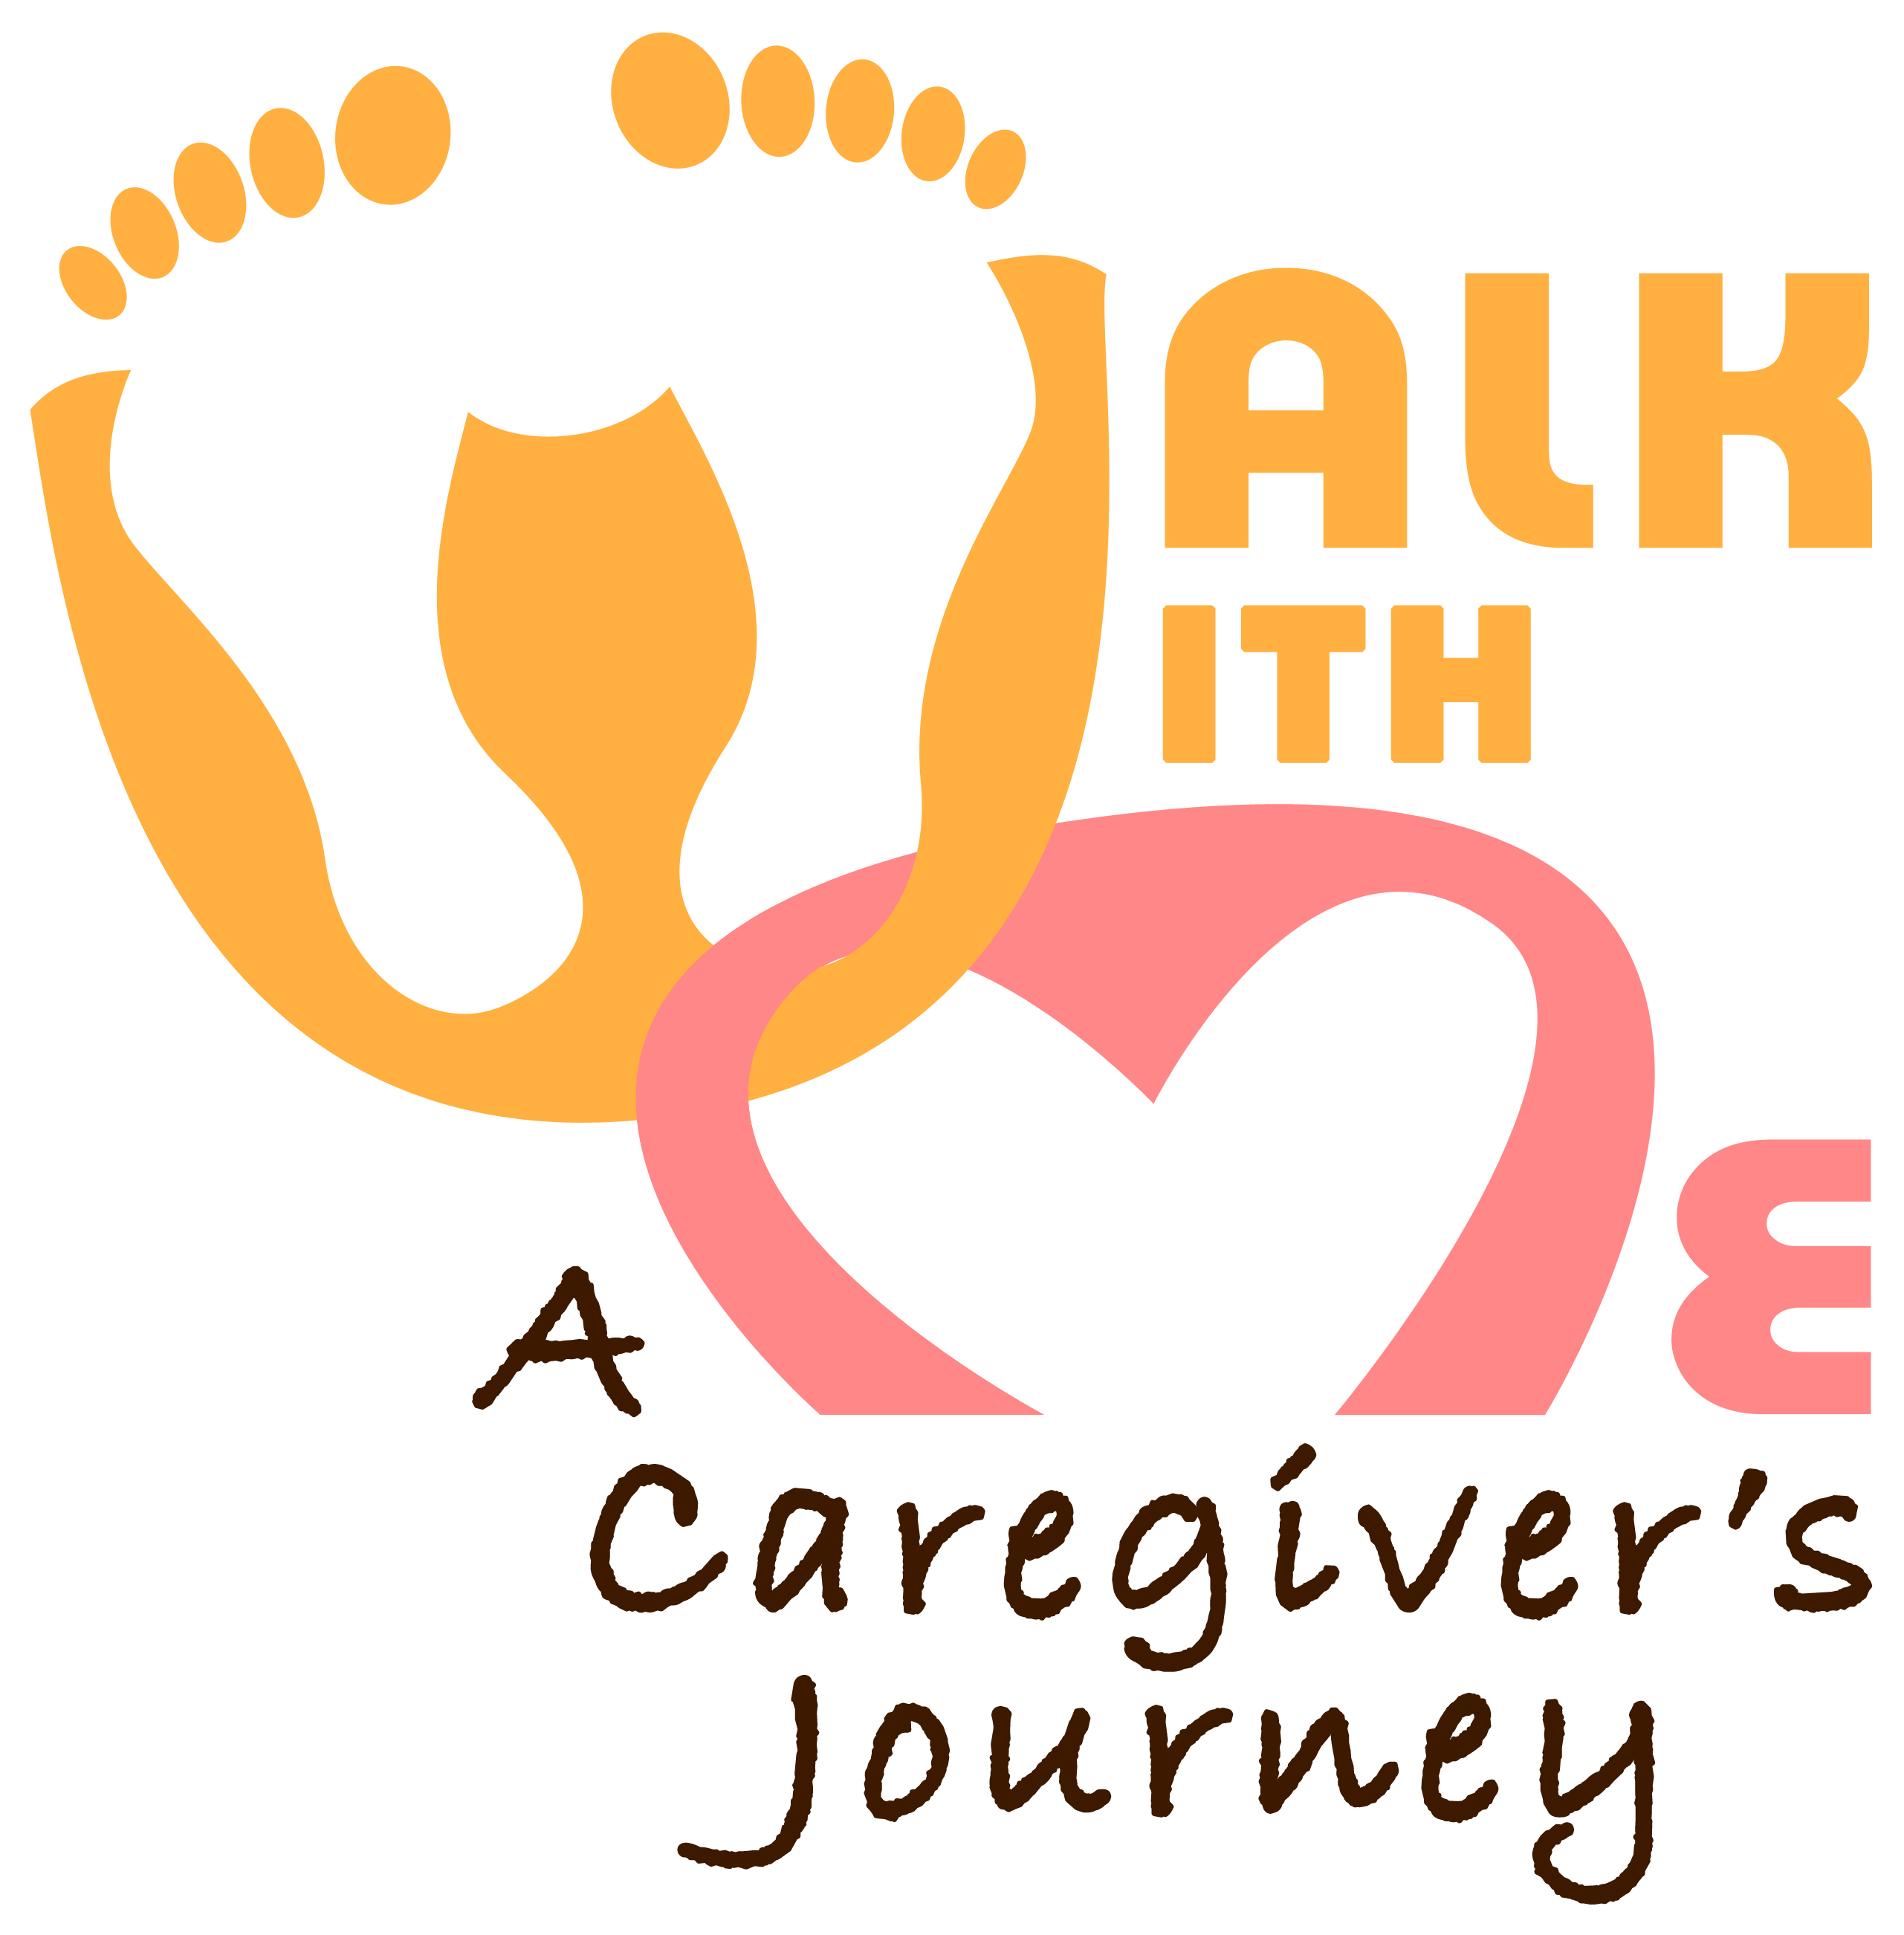 Caregiver Logo - Welcome on the journey of caregiving | Walk With Me